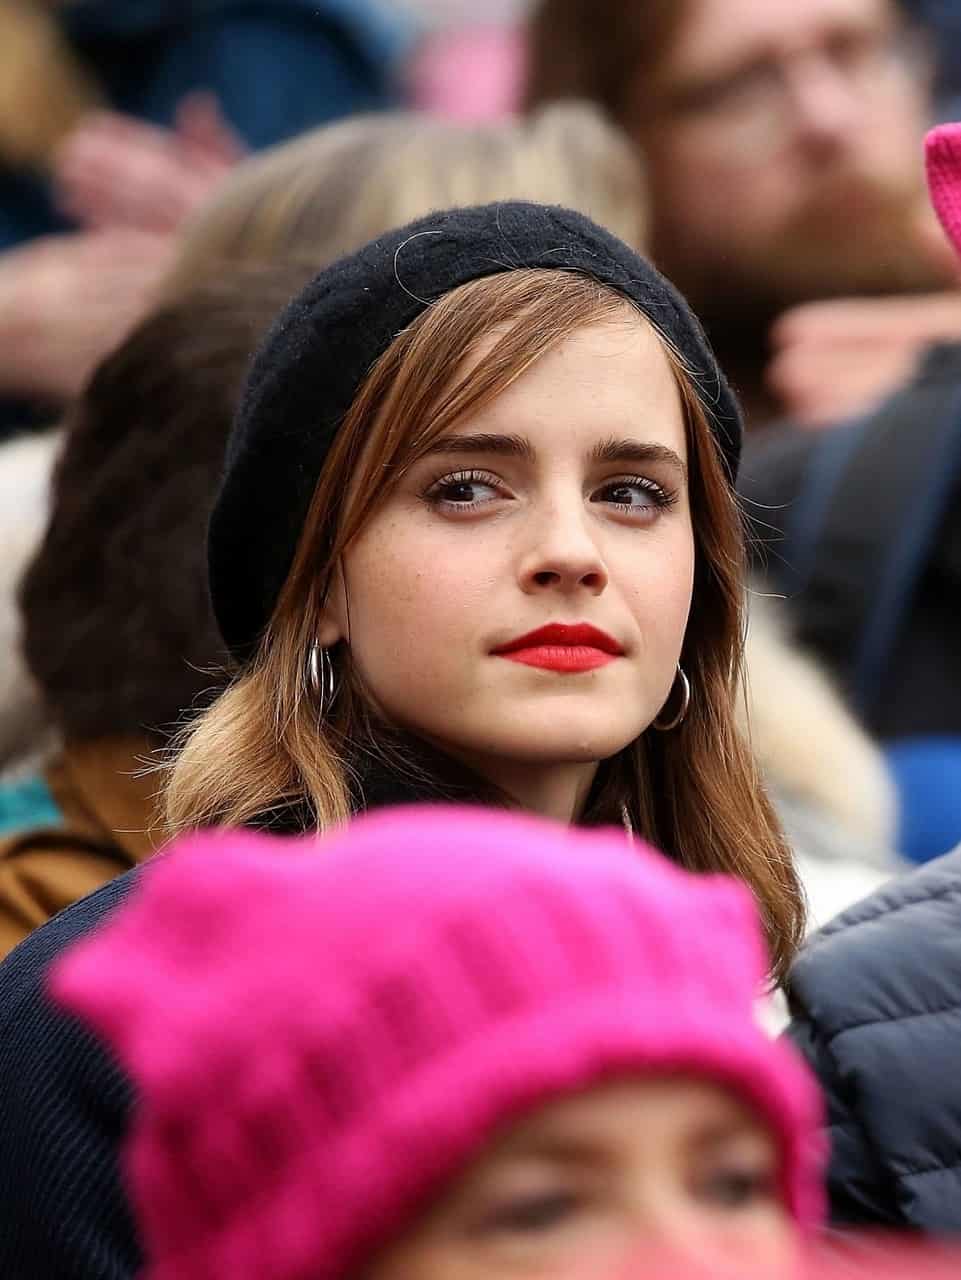 Emma Watson Attended the Women's March Against Trump in Washington, D.C